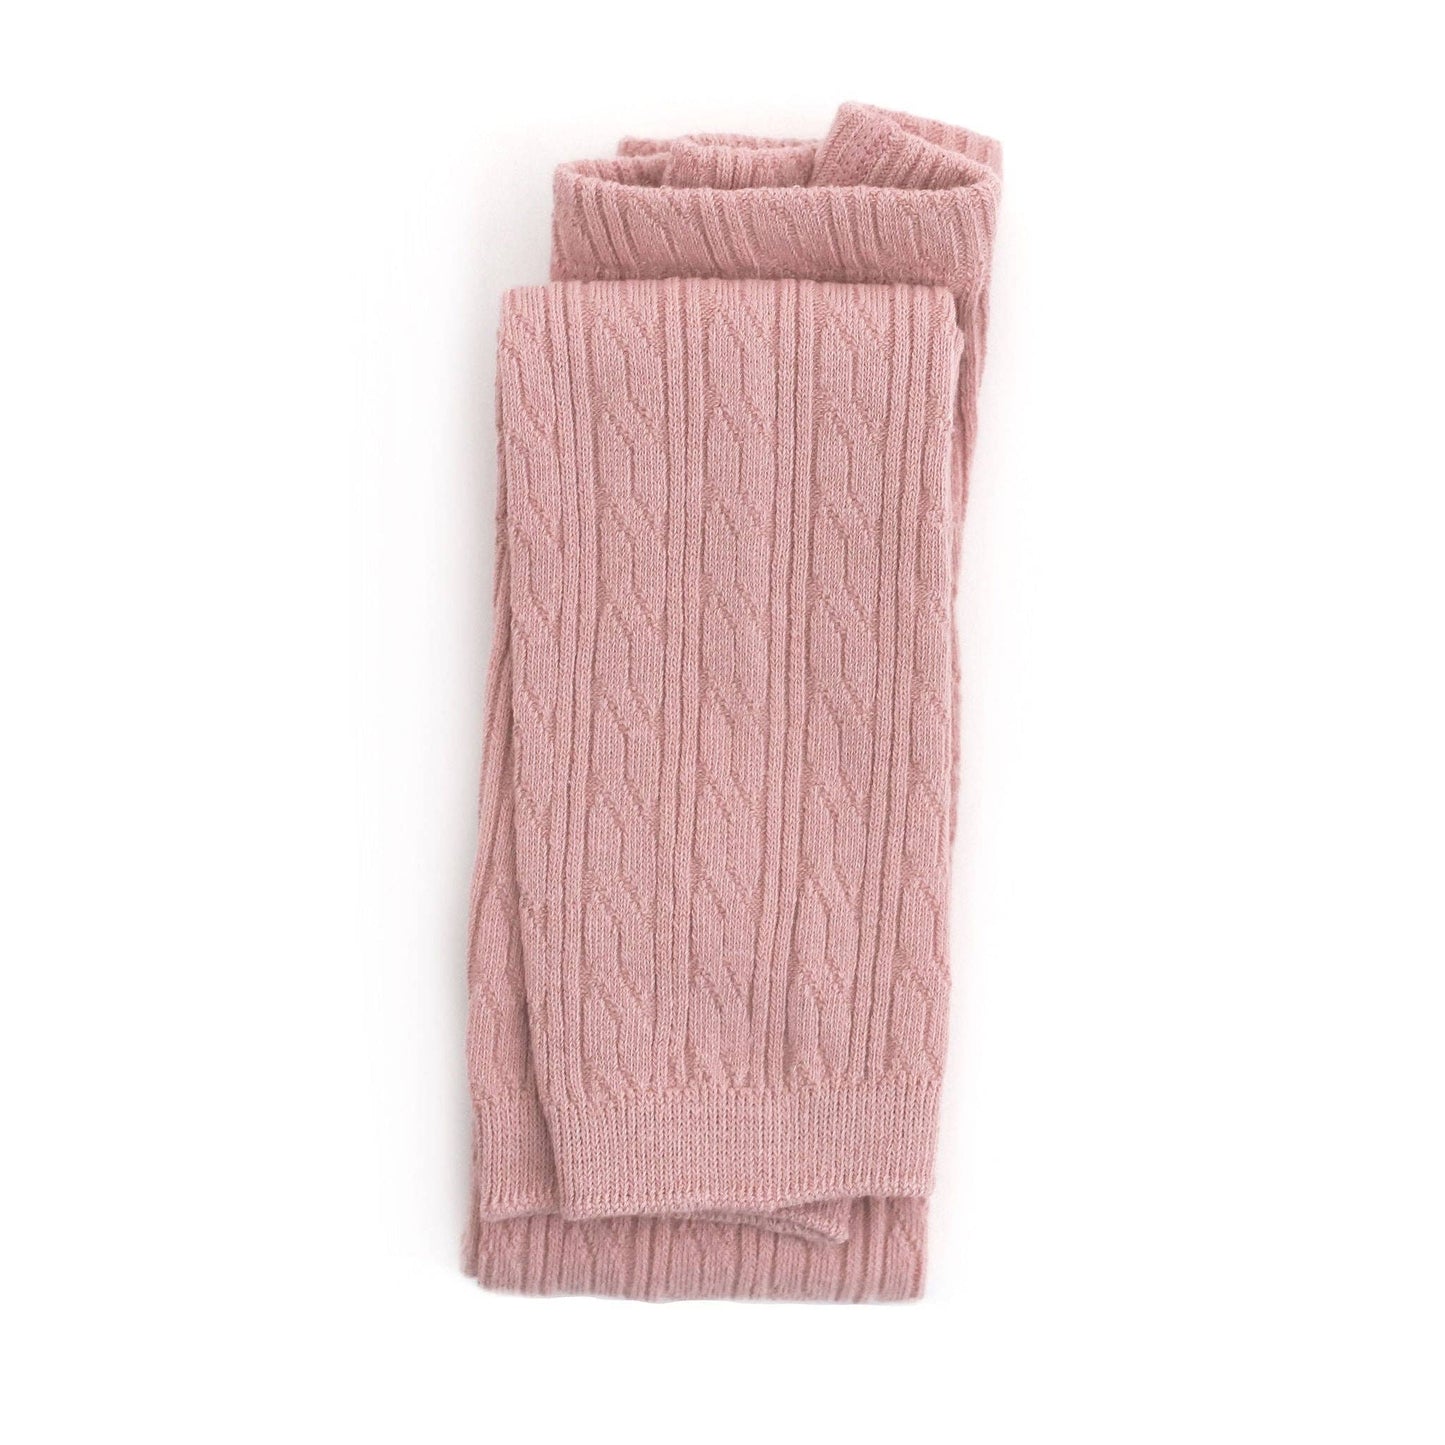 Little Stocking Co. - Blush Pink Cable Knit Footless Tights: 3-4 YEARS